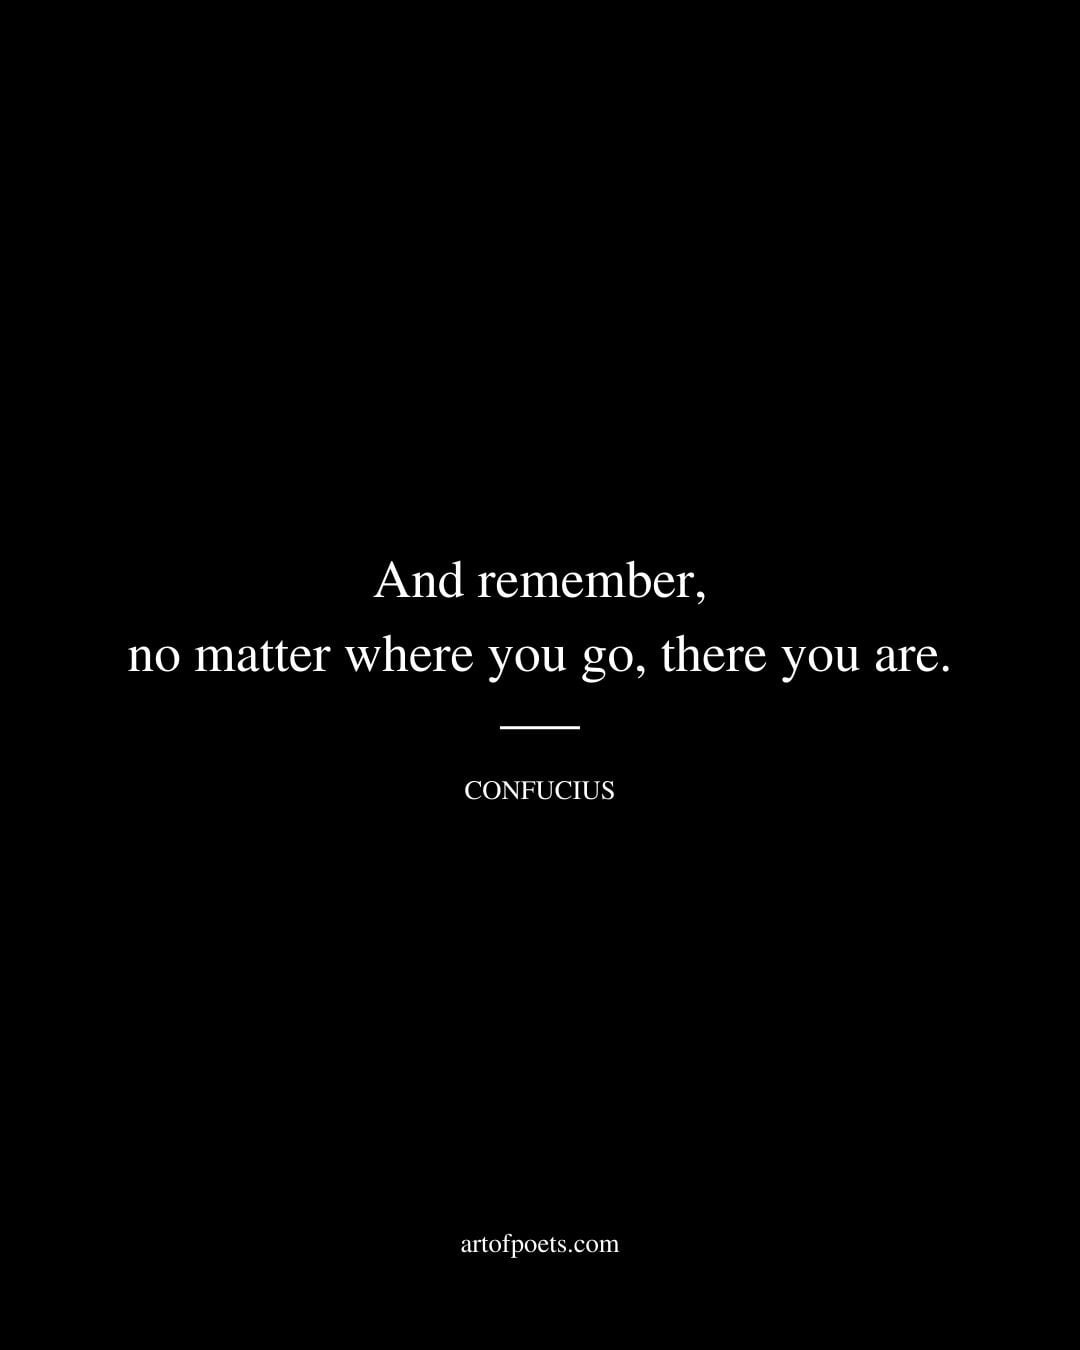 And remember no matter where you go there you are